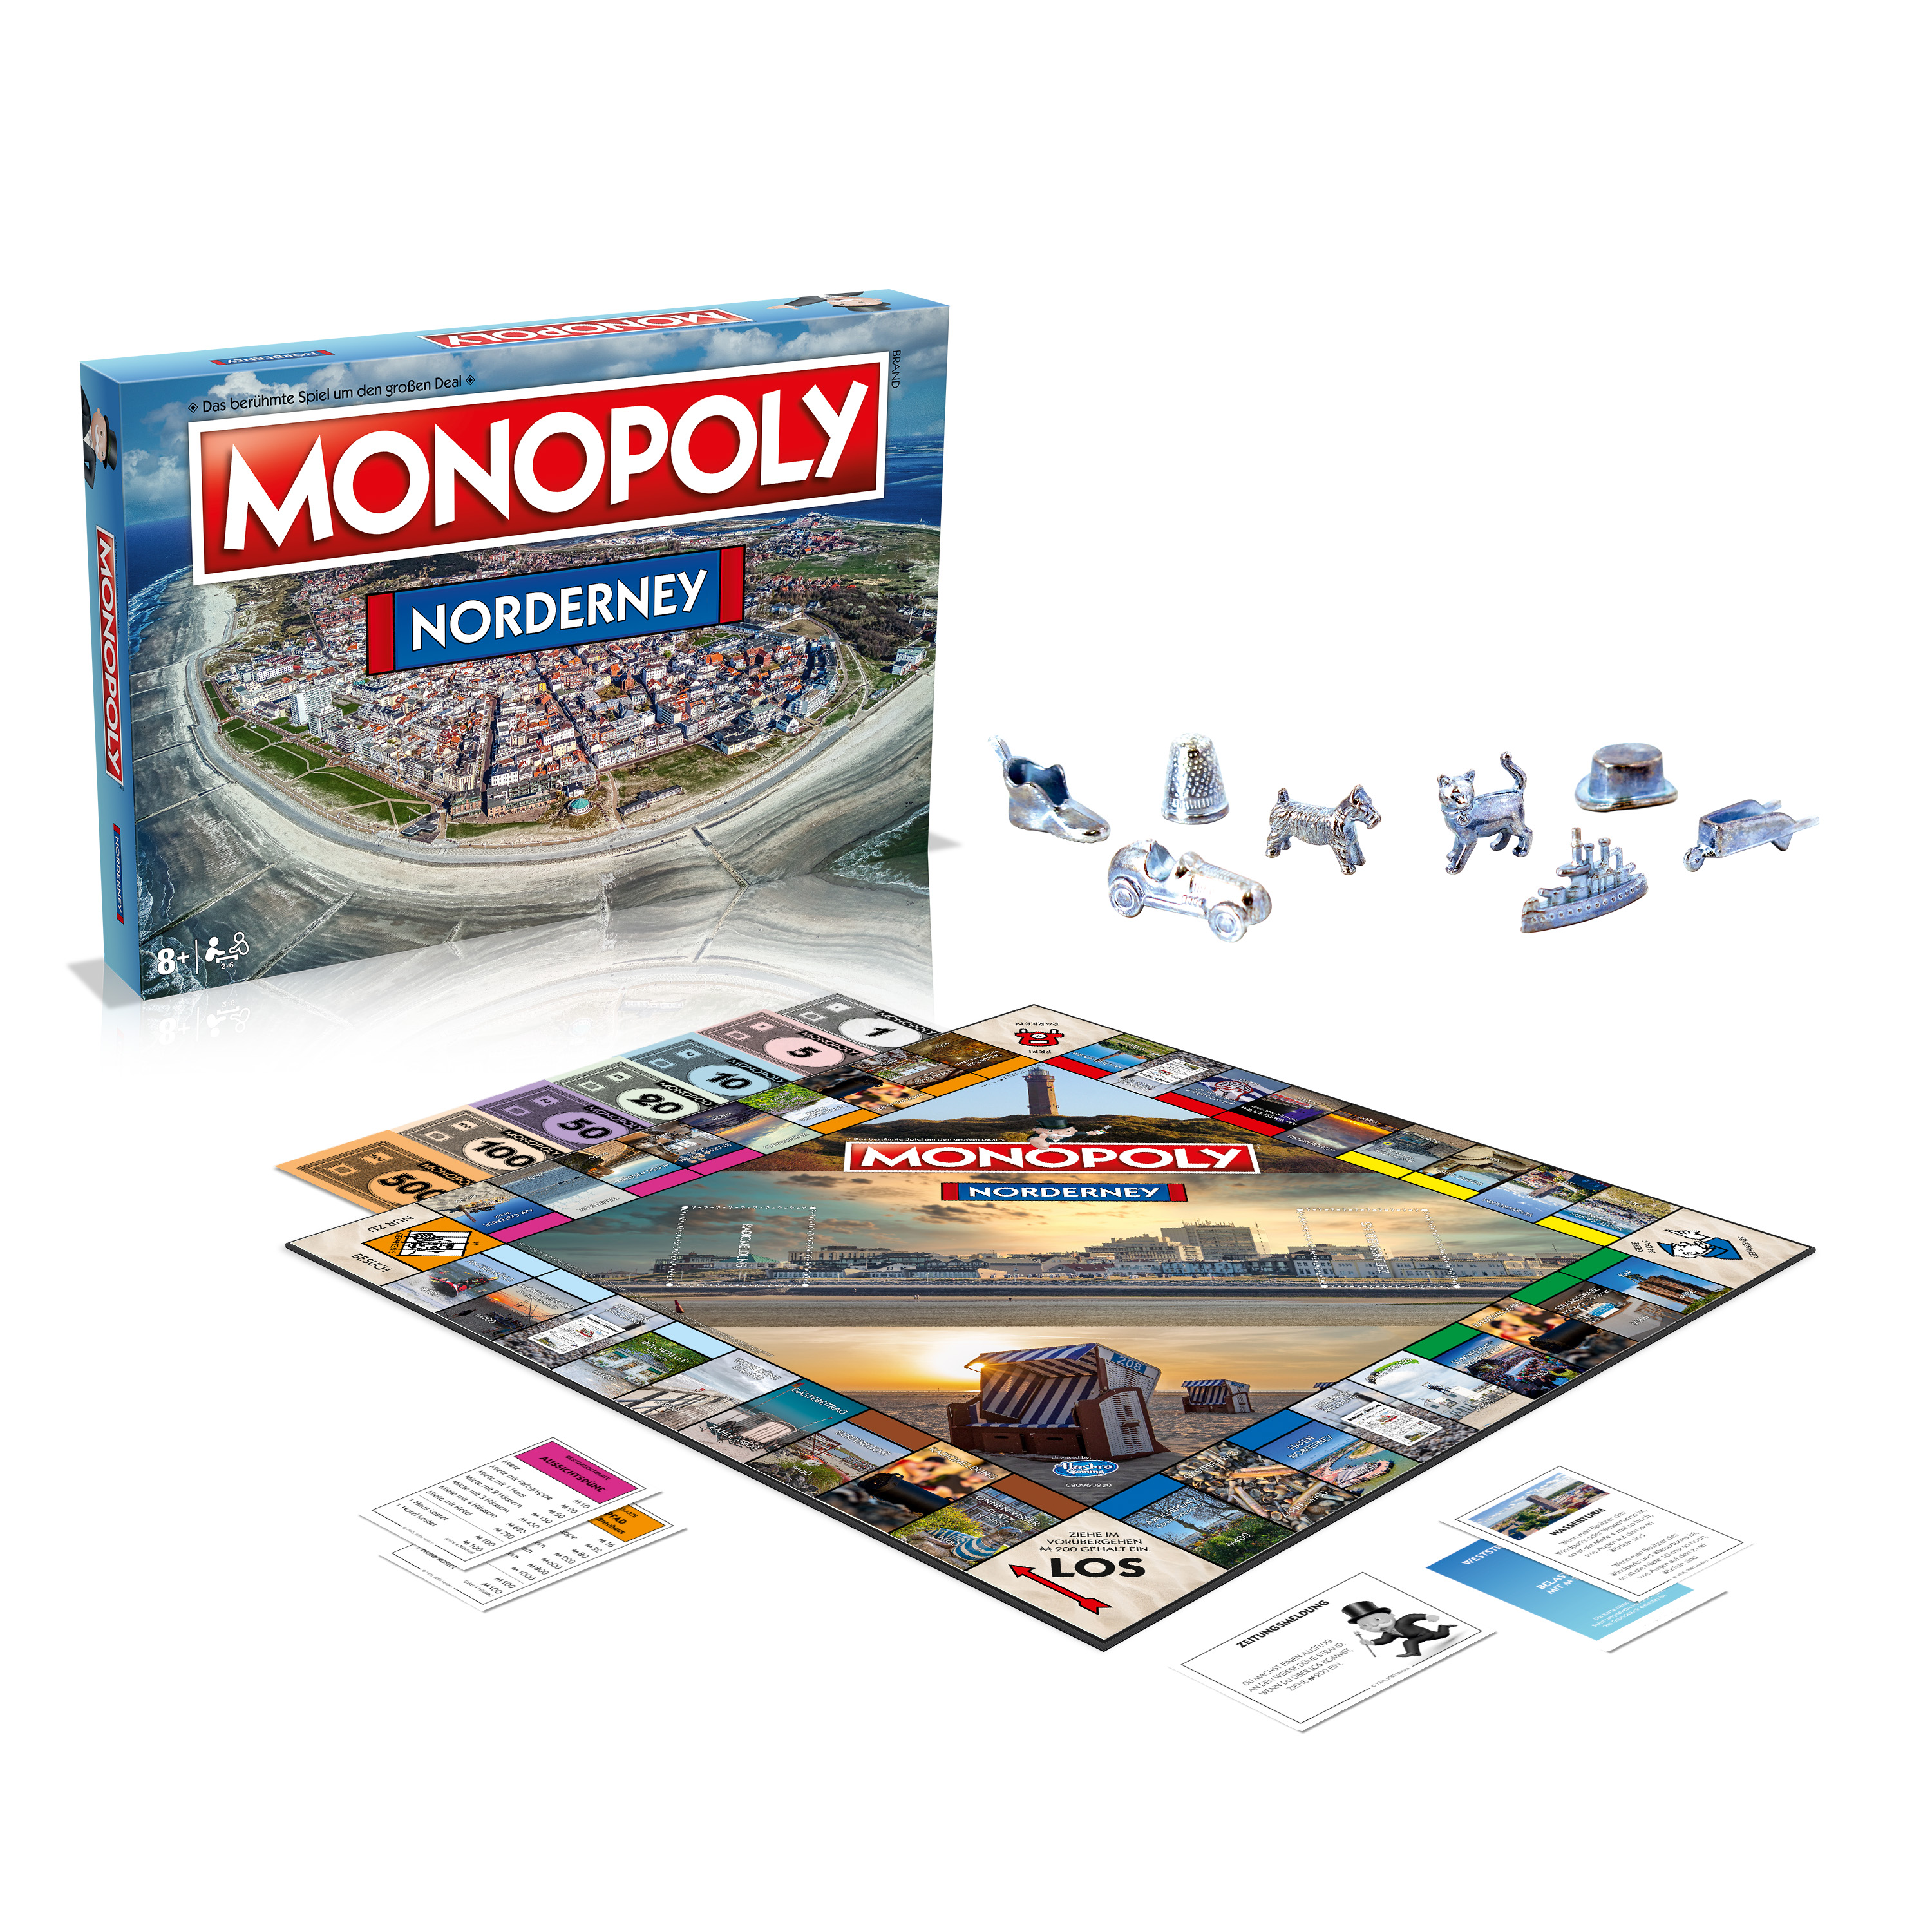 Monopoly - Norderney